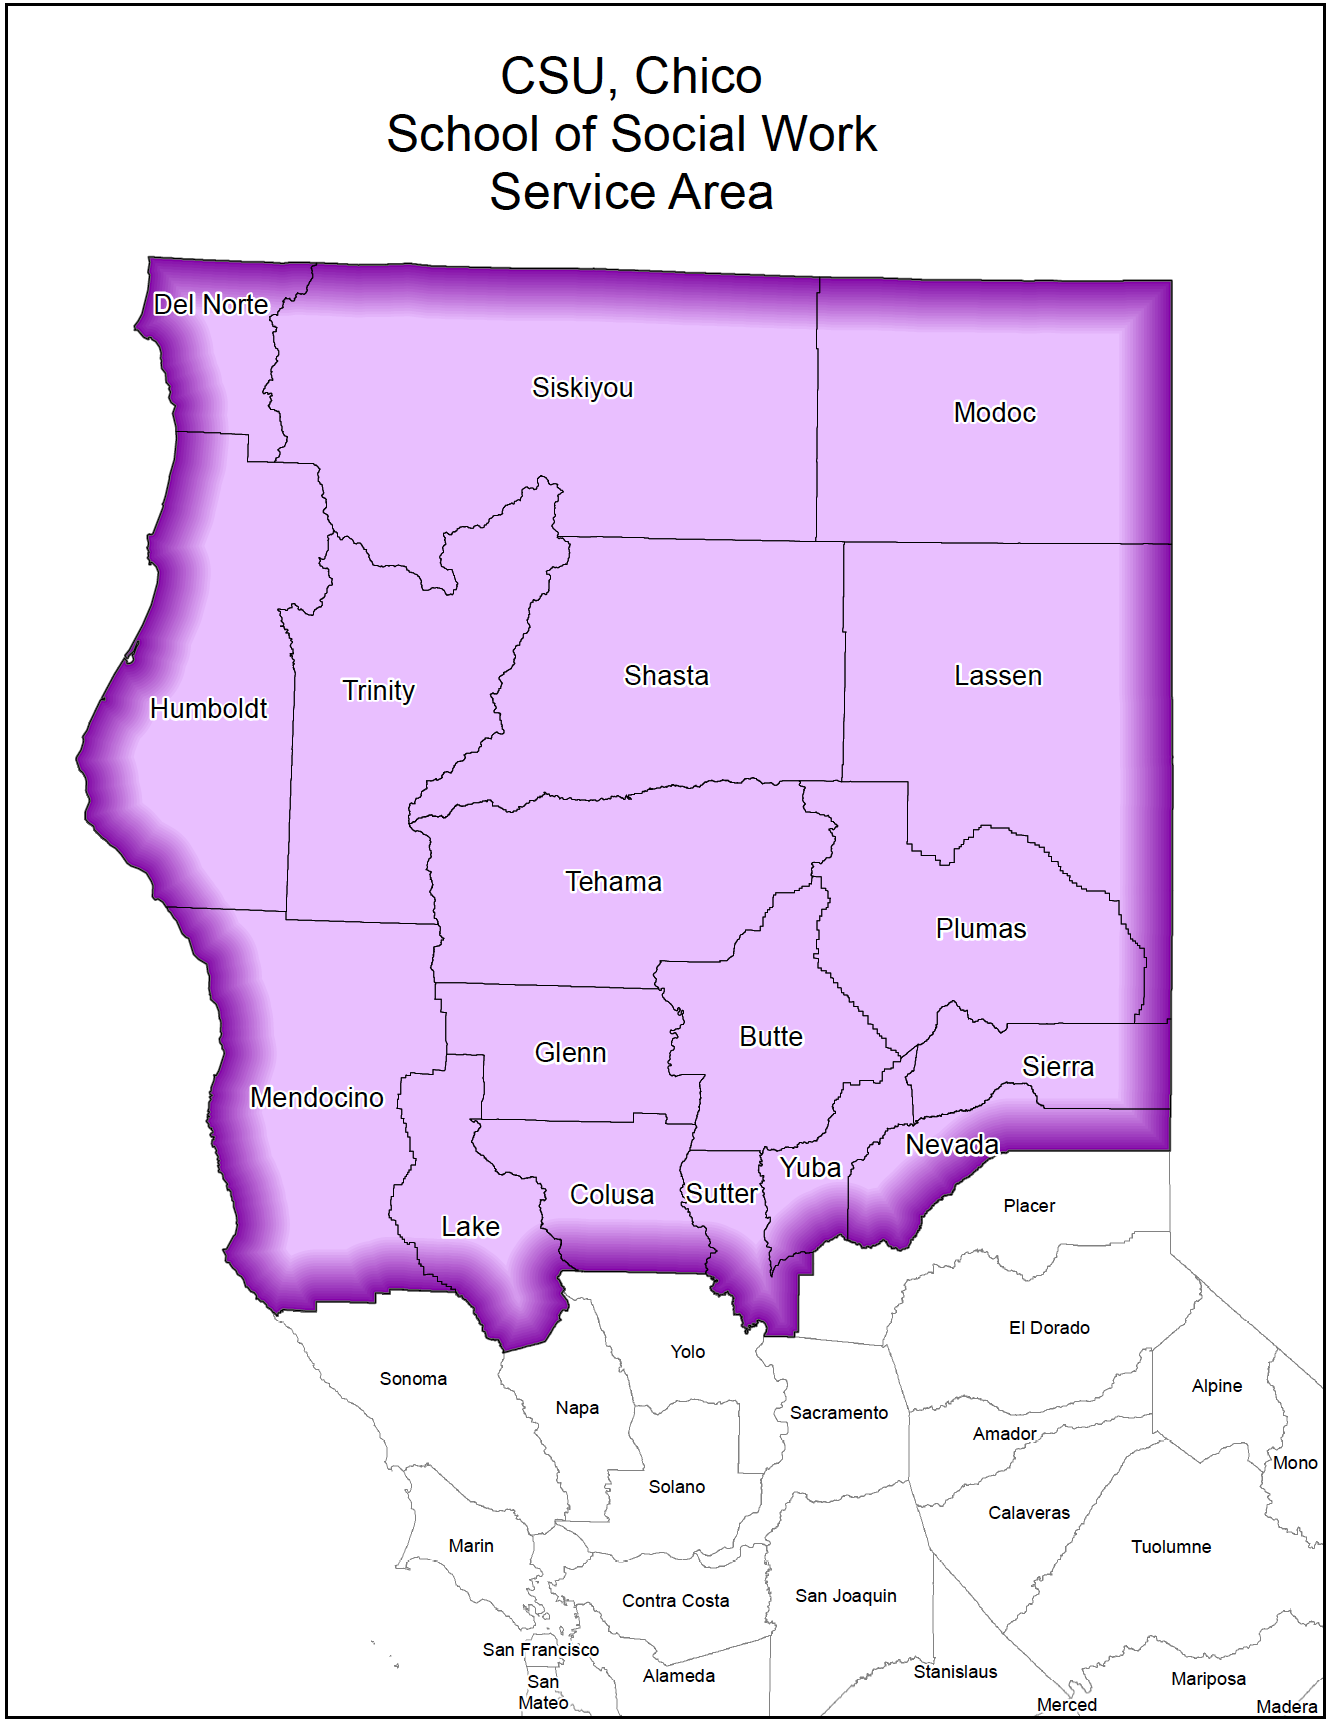 image of 18 northern california counties within the CSU, Chico service region